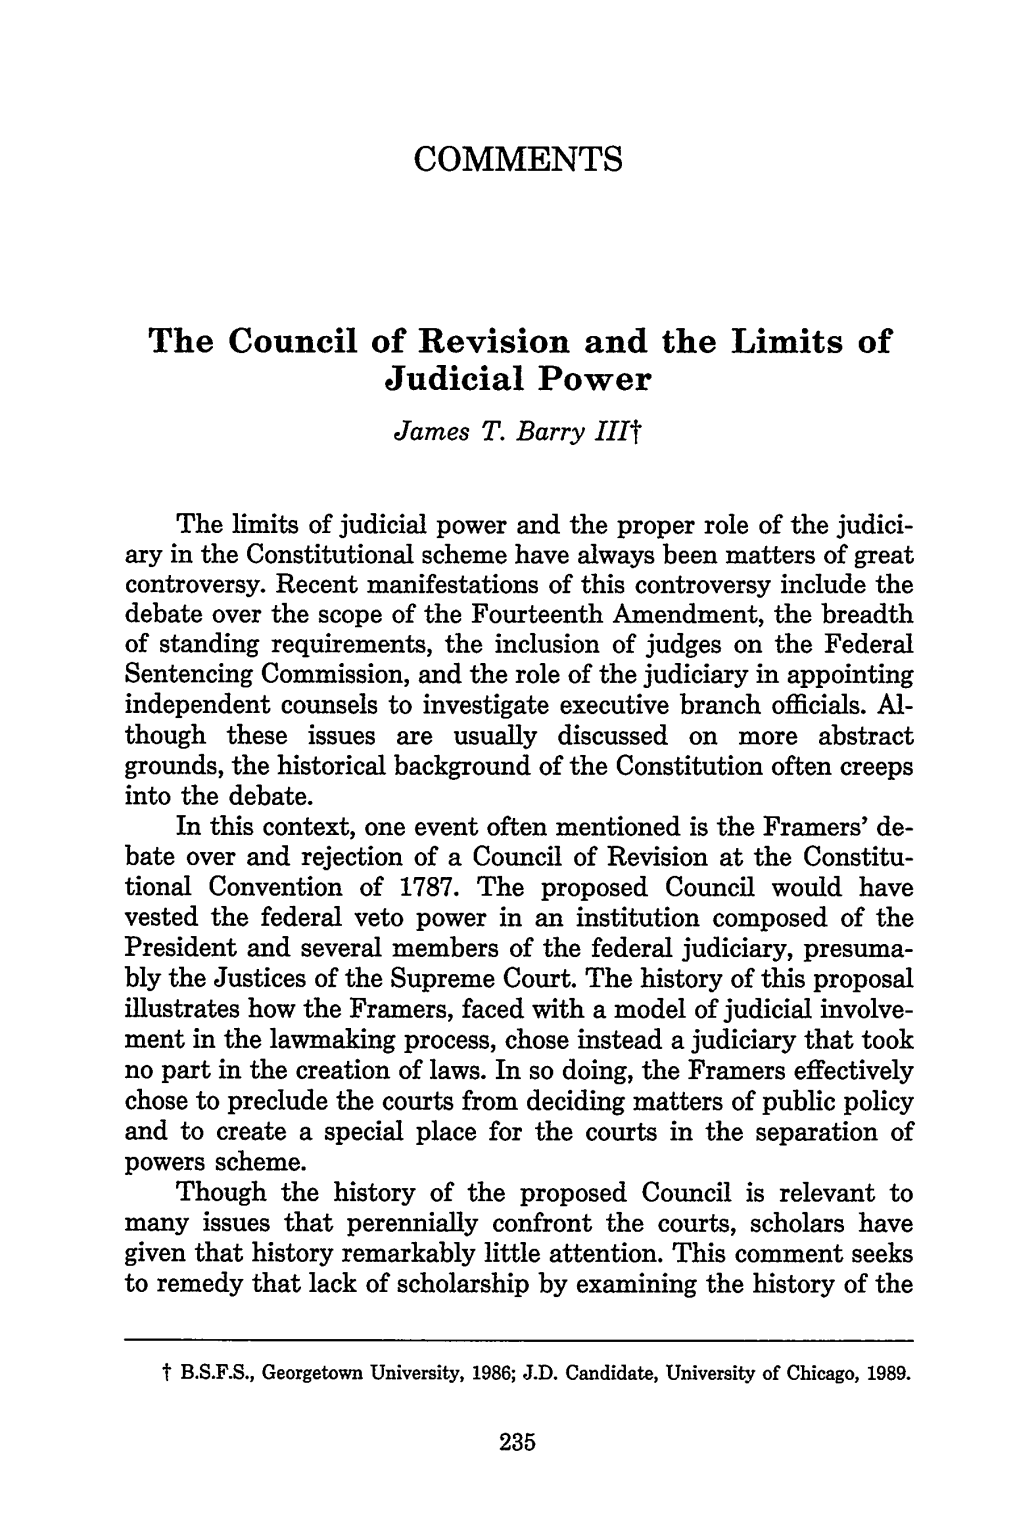 The Council of Revision and the Limits of Judicial Power James T